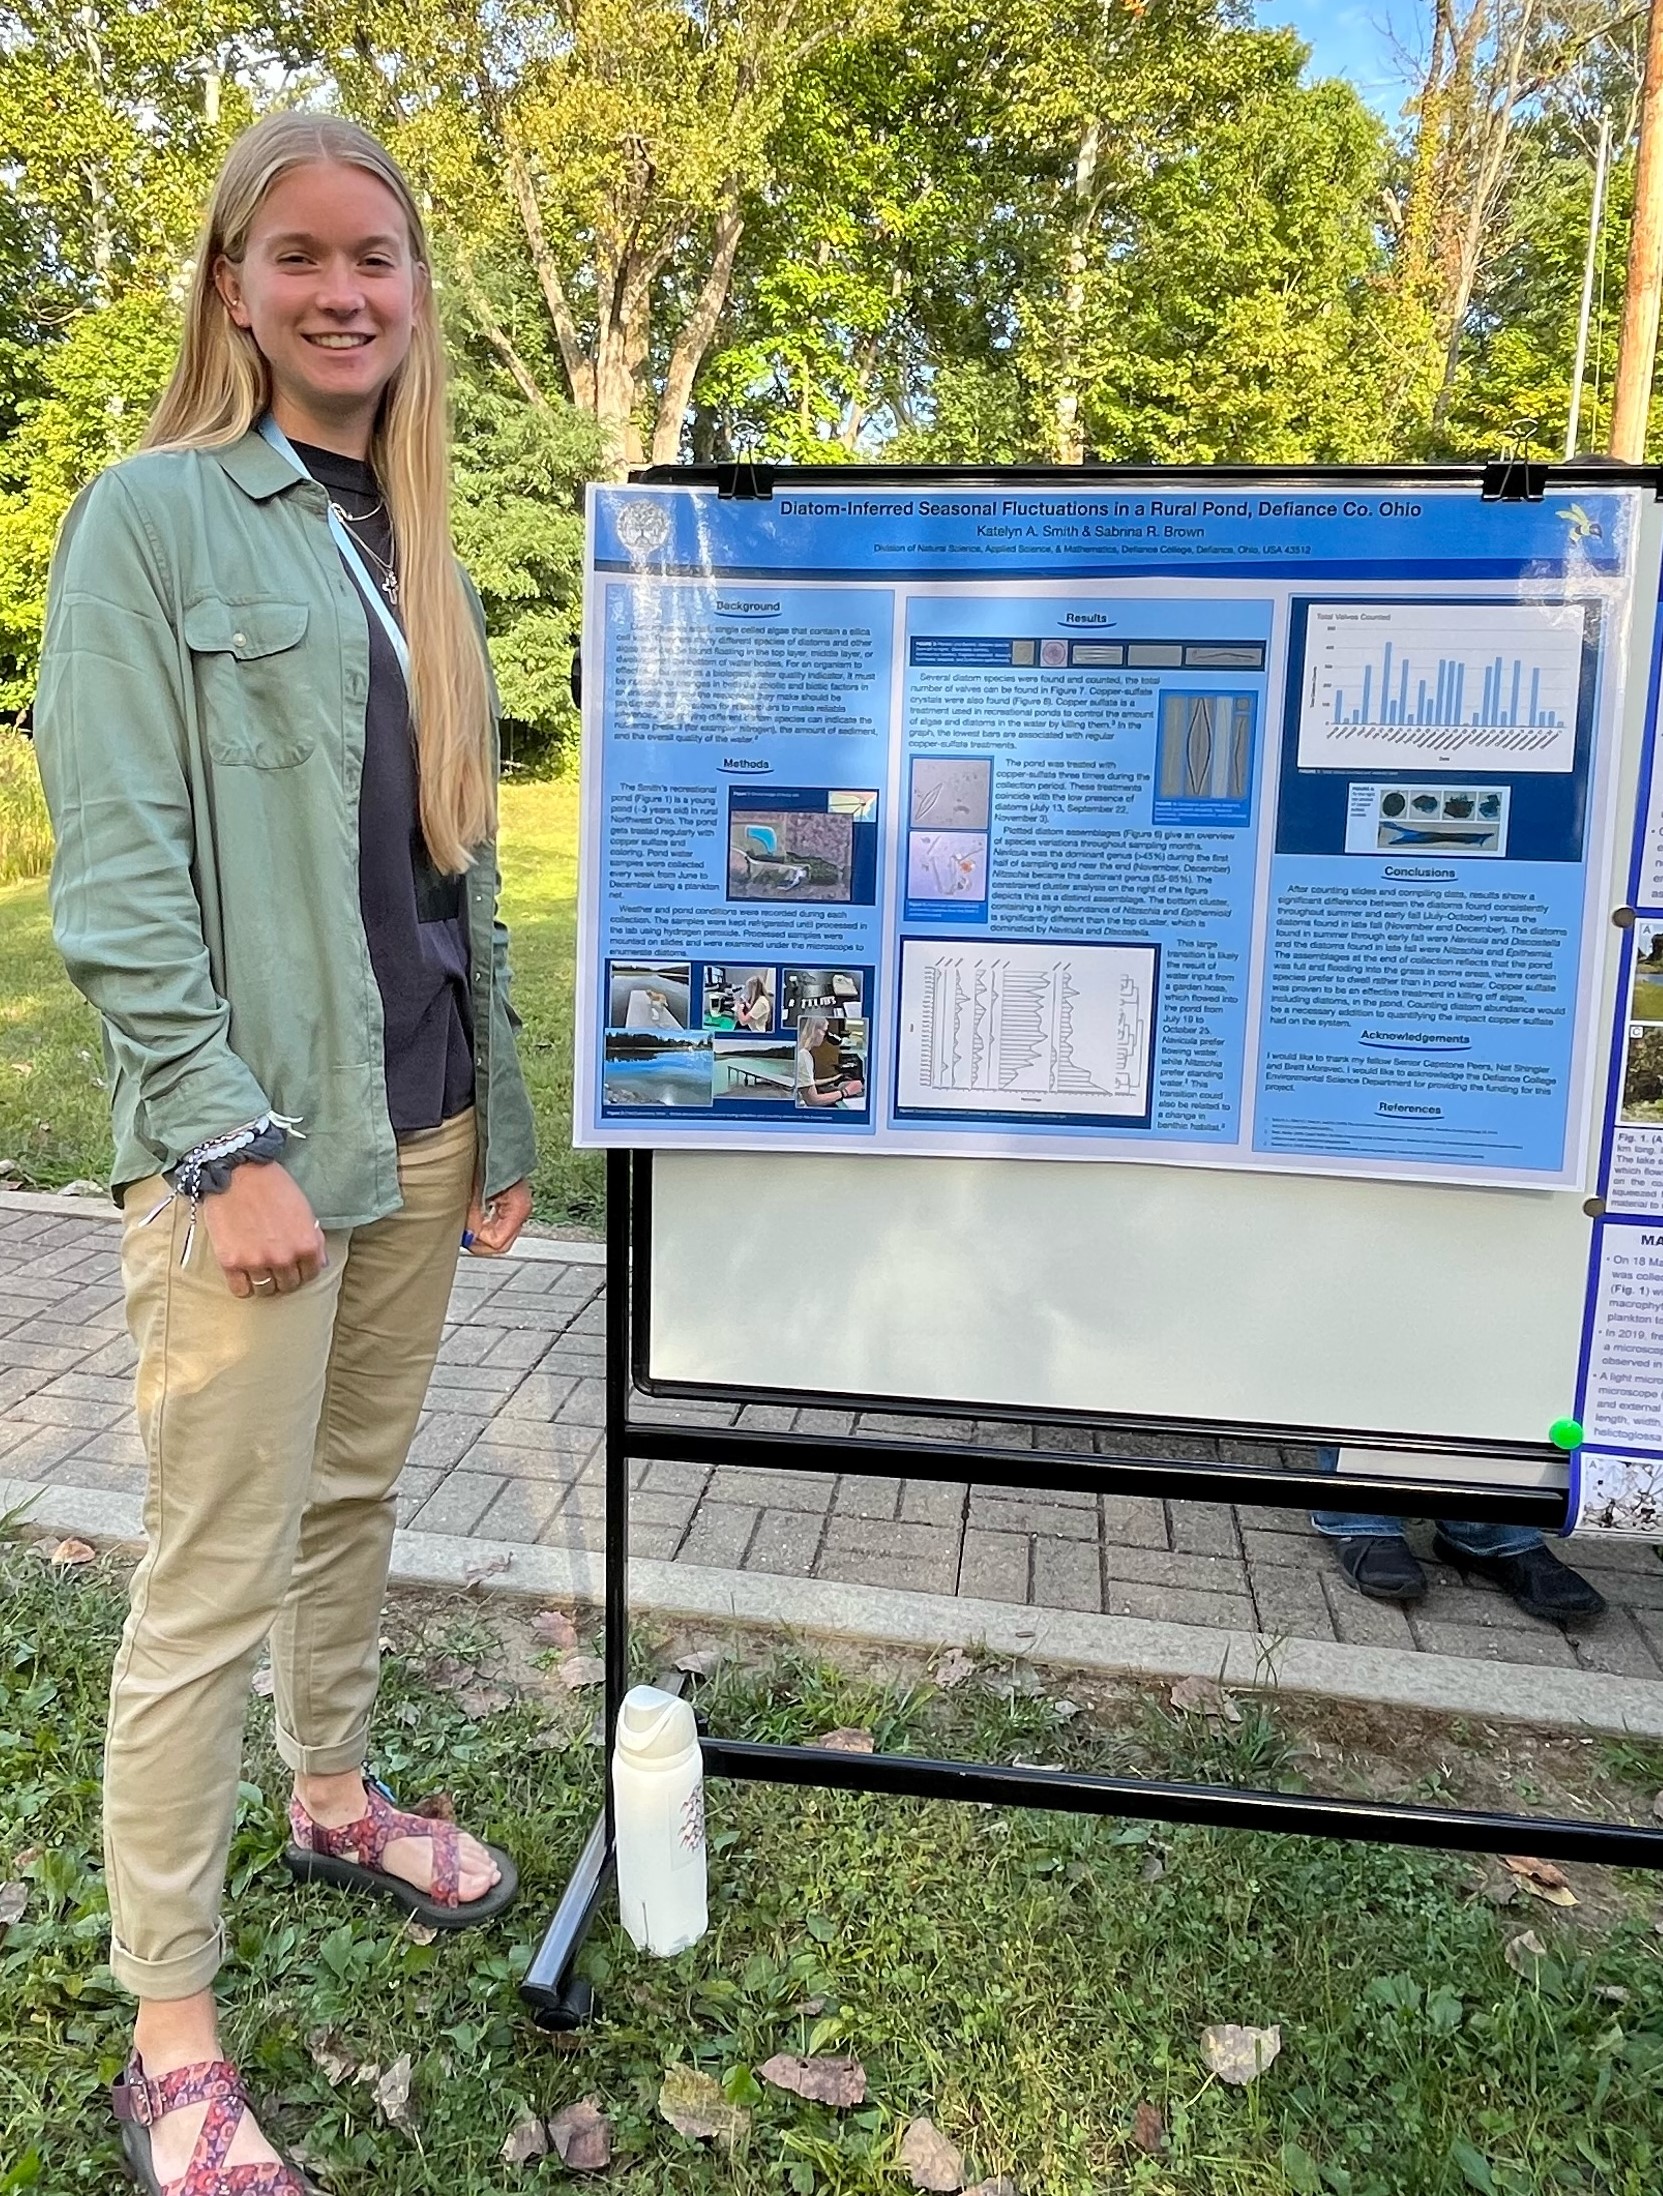 Female presenting research on fluctuations in local pond